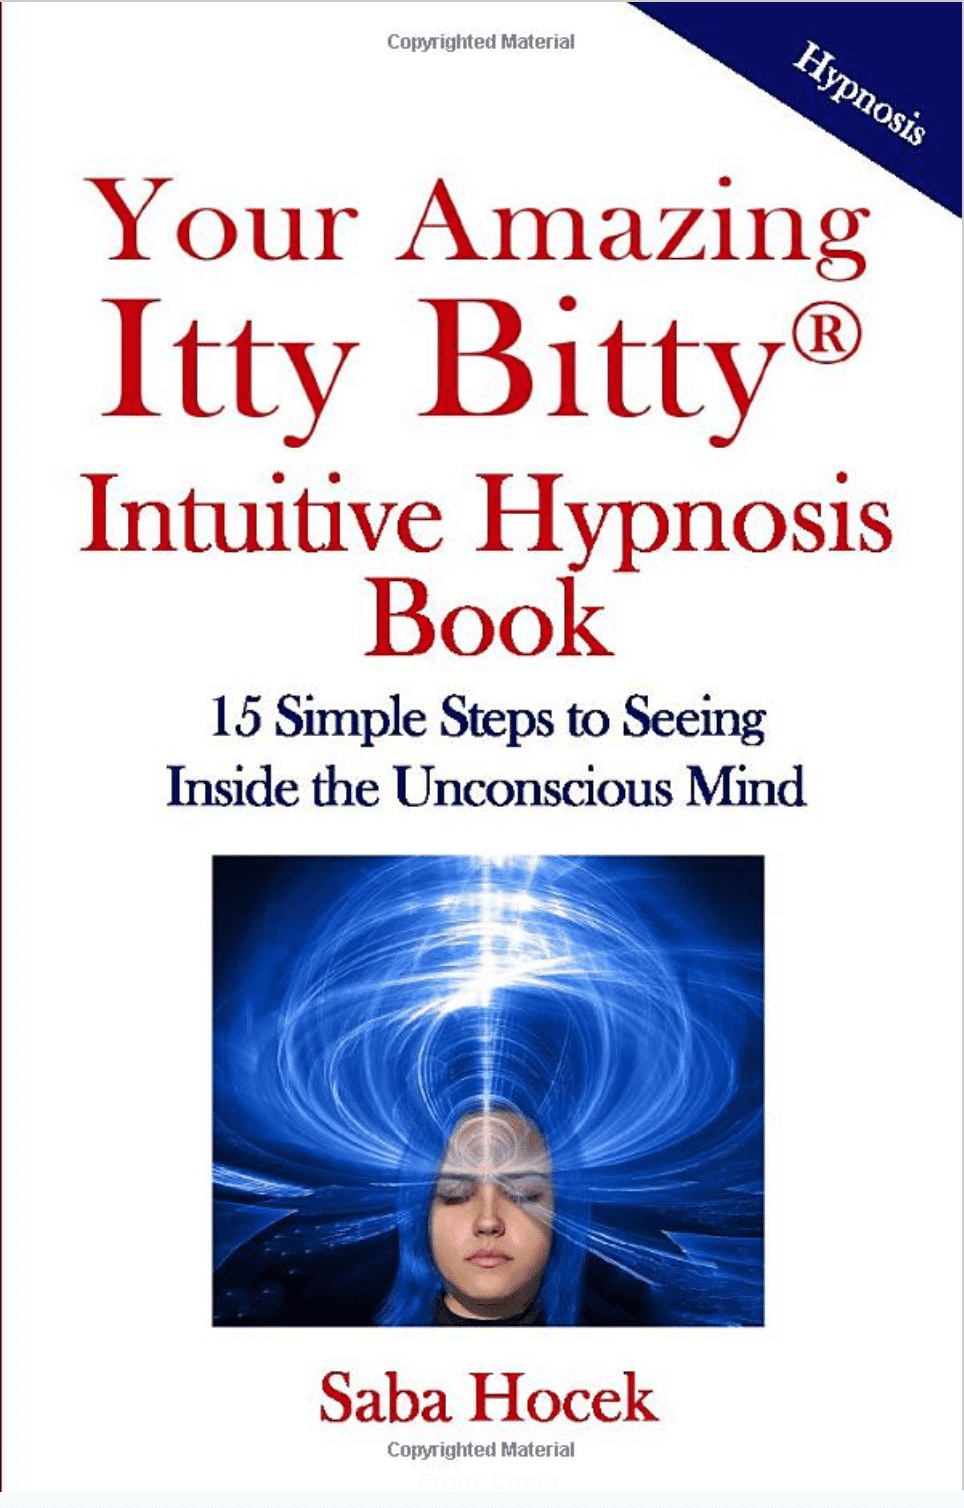 Cover of Intuitive Hypnosis book written by Self Empowered Minds' Director, Saba Hocek